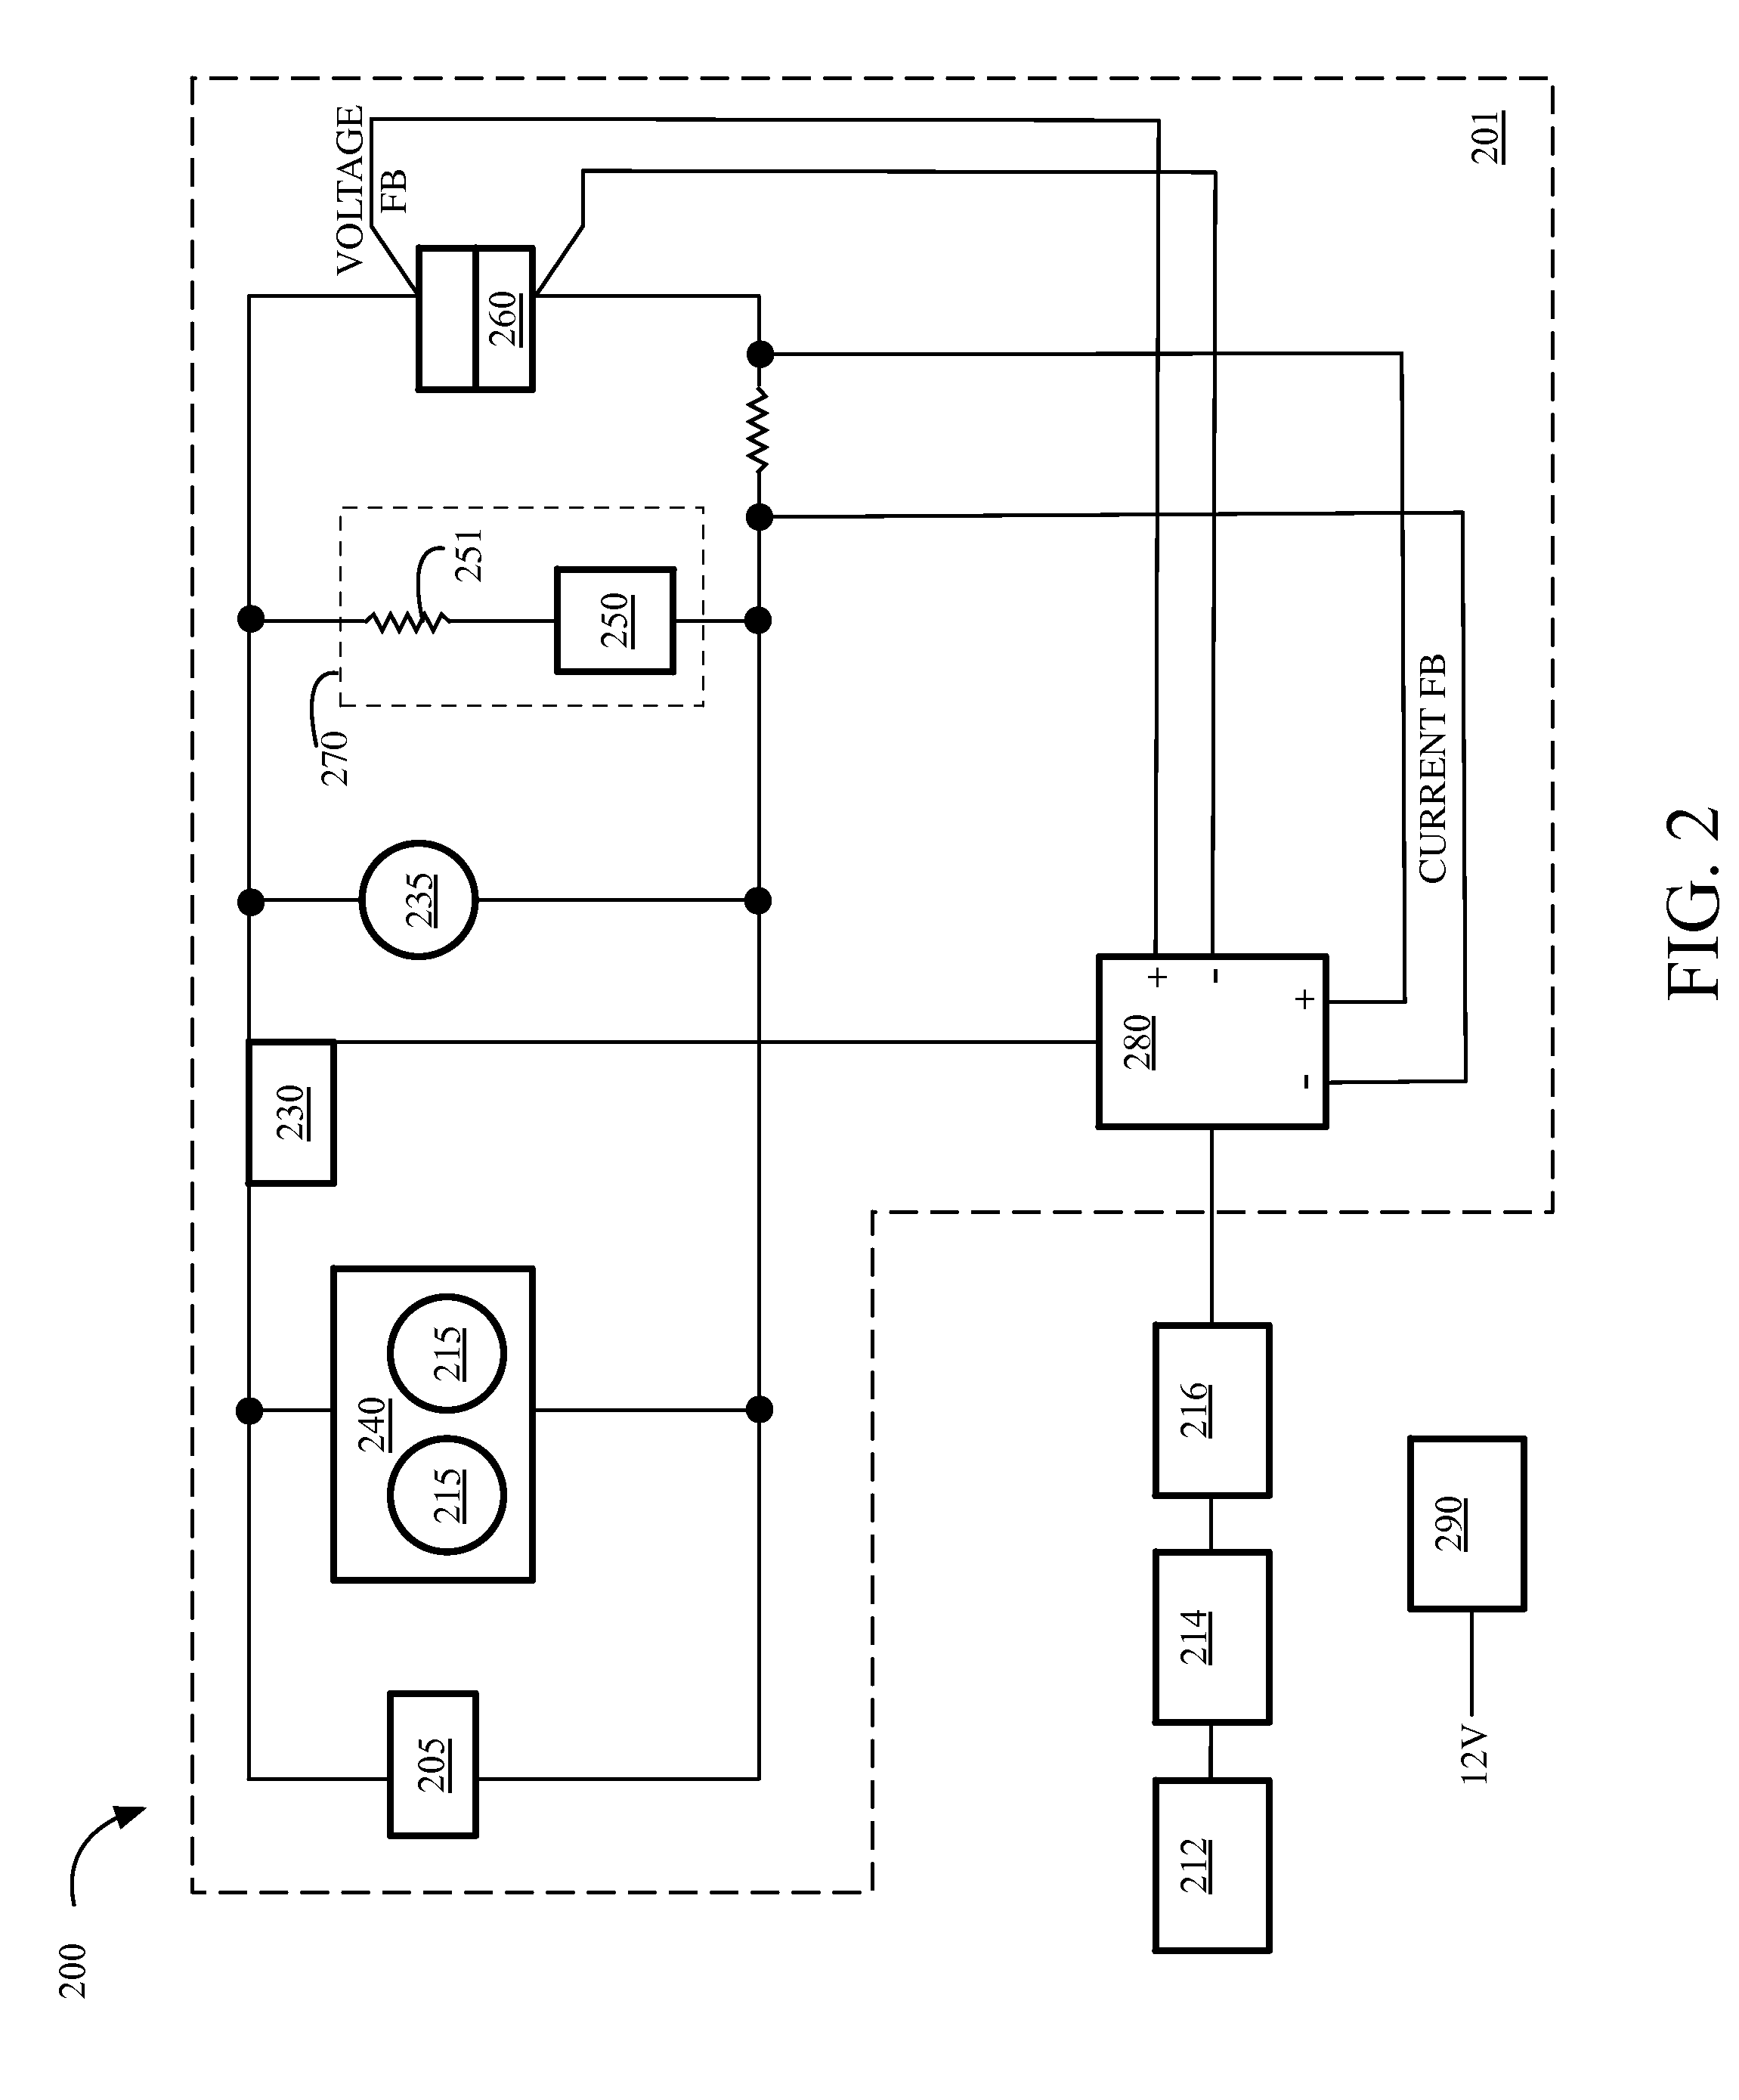 Thermal Management for a Super Capacitor Power Supply